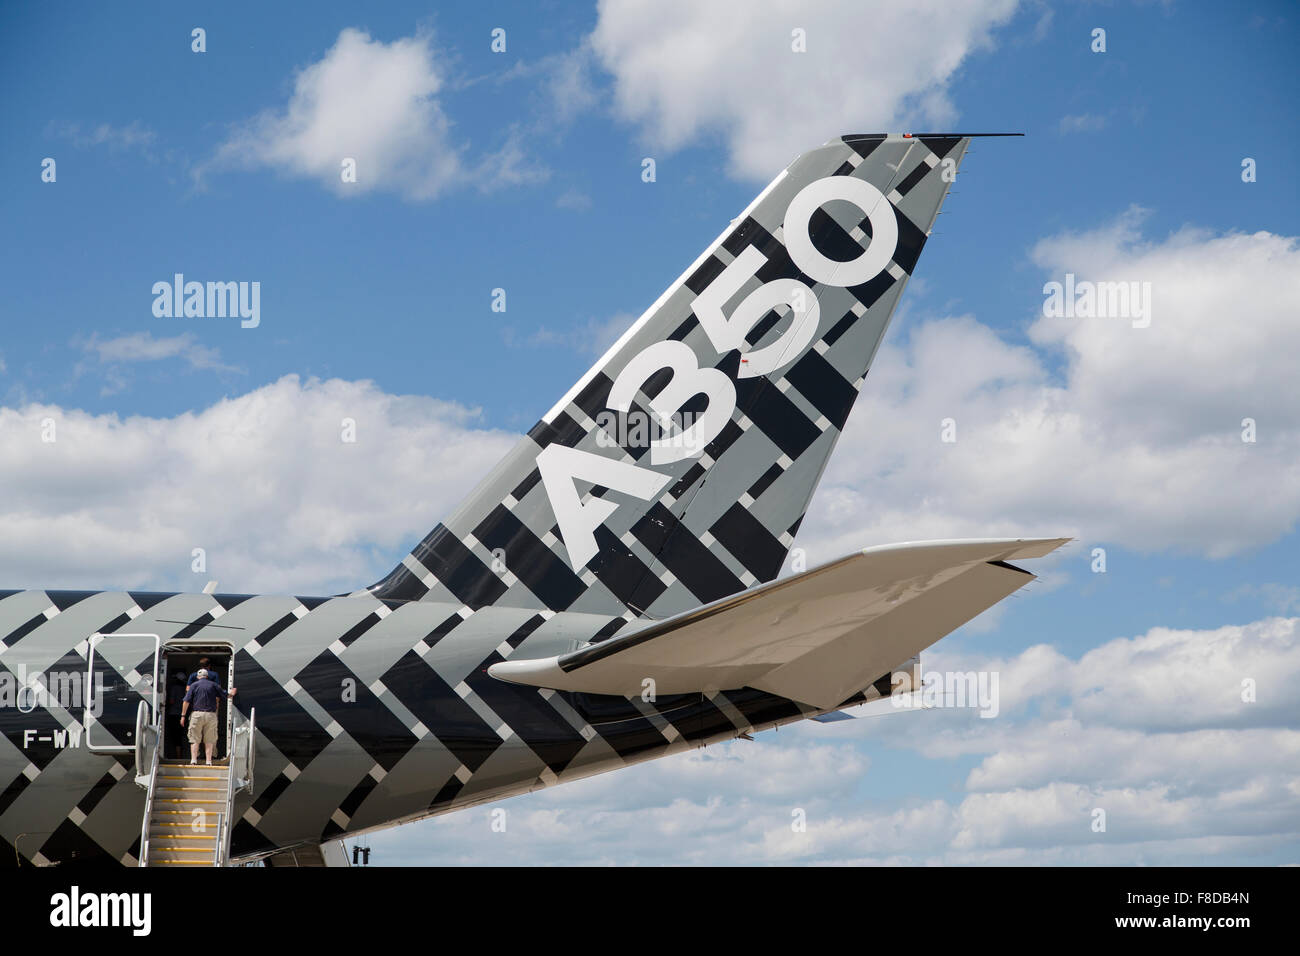 The Airbus A350 XWB test aircraft is a two-engine aircraft is designed to transport more than 300 passengers. Stock Photo